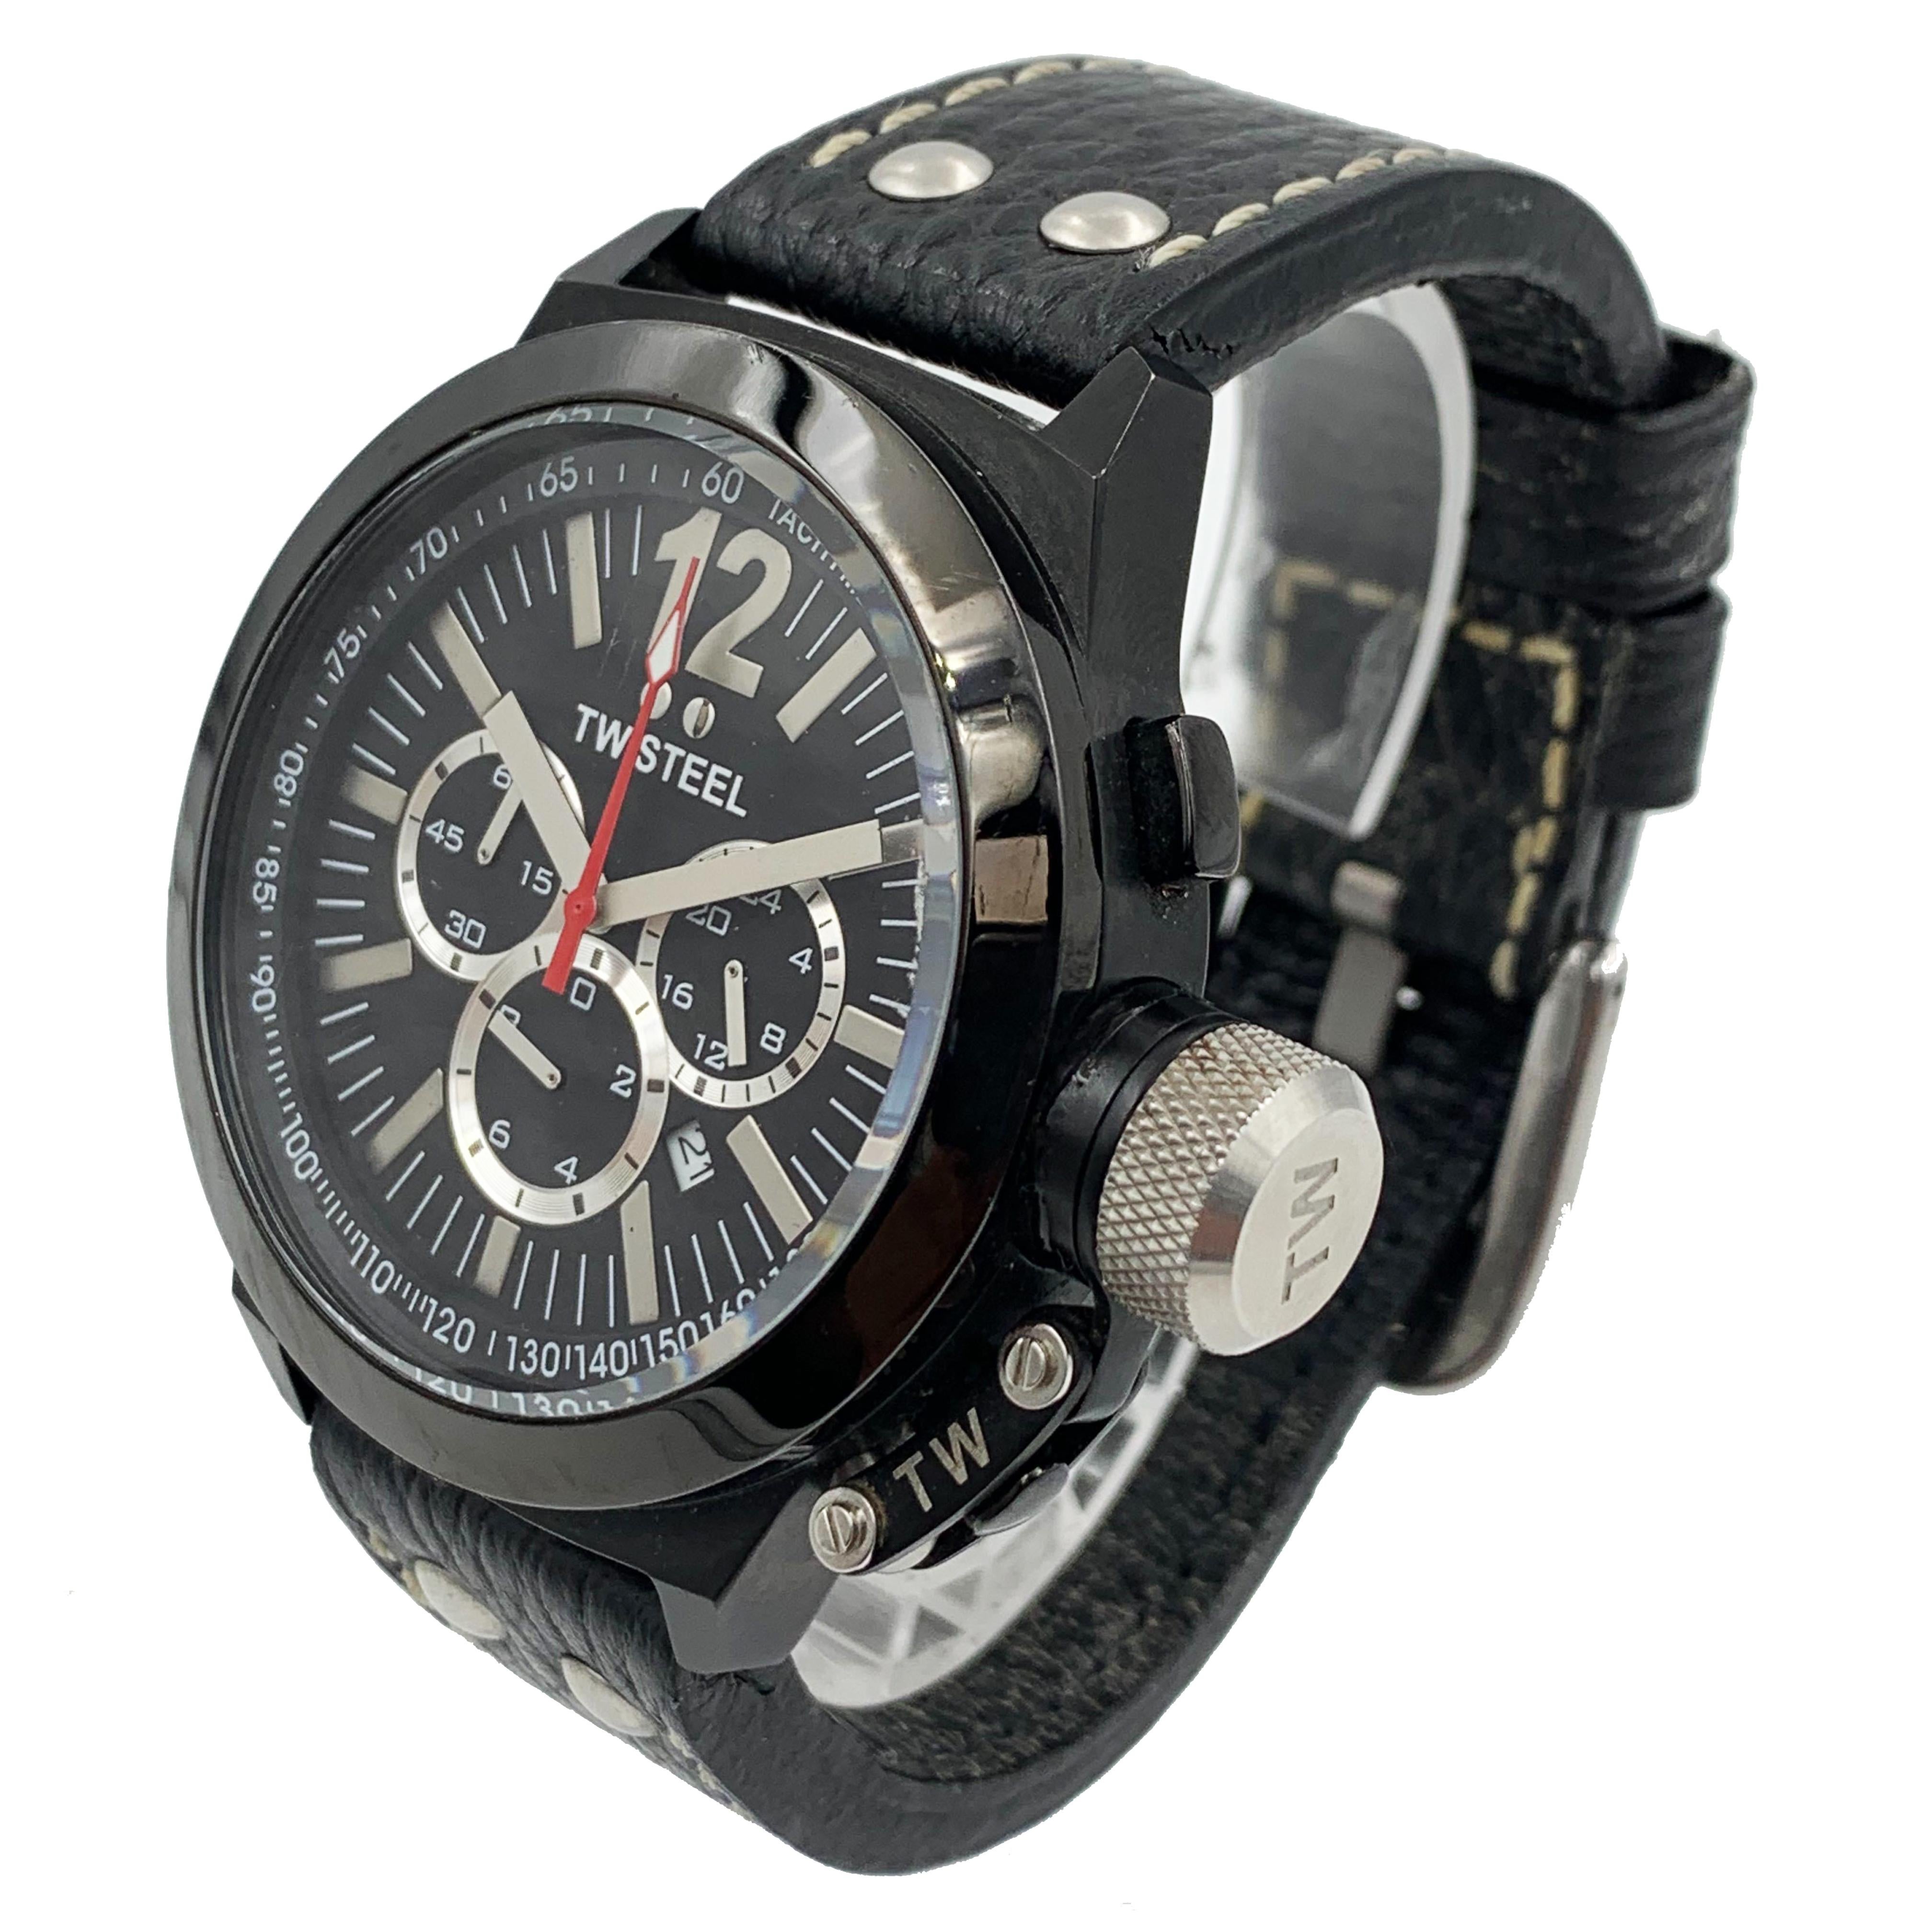 This is pre owned Watch.
Watch have visible signs of wear..
Minor Scratches on case and on bezel.
Leather Band have visible signs of use as visible in pictures.  
Quartz movement
Black chronograph dial
Black coated steel case black leather